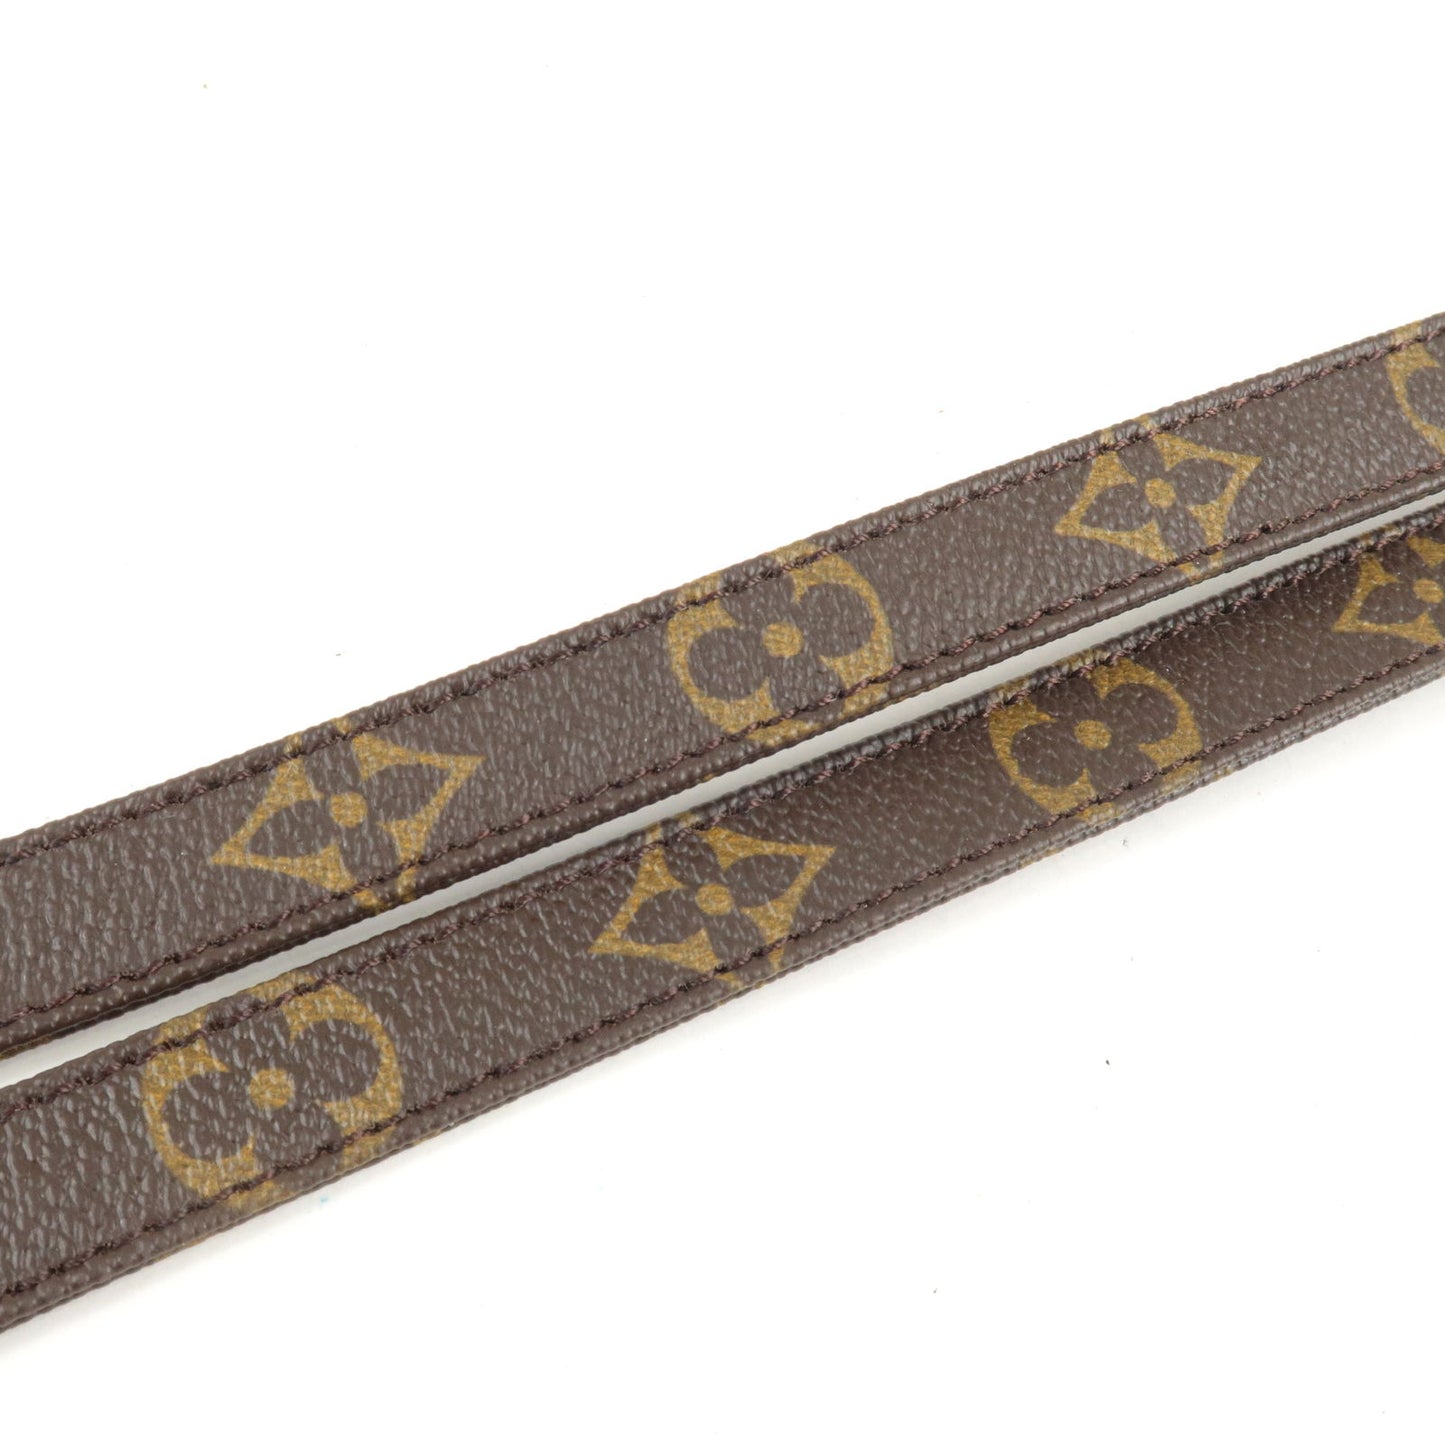 Only 398.00 usd for LOUIS VUITTON Monogram Canvas Nylon Strap with